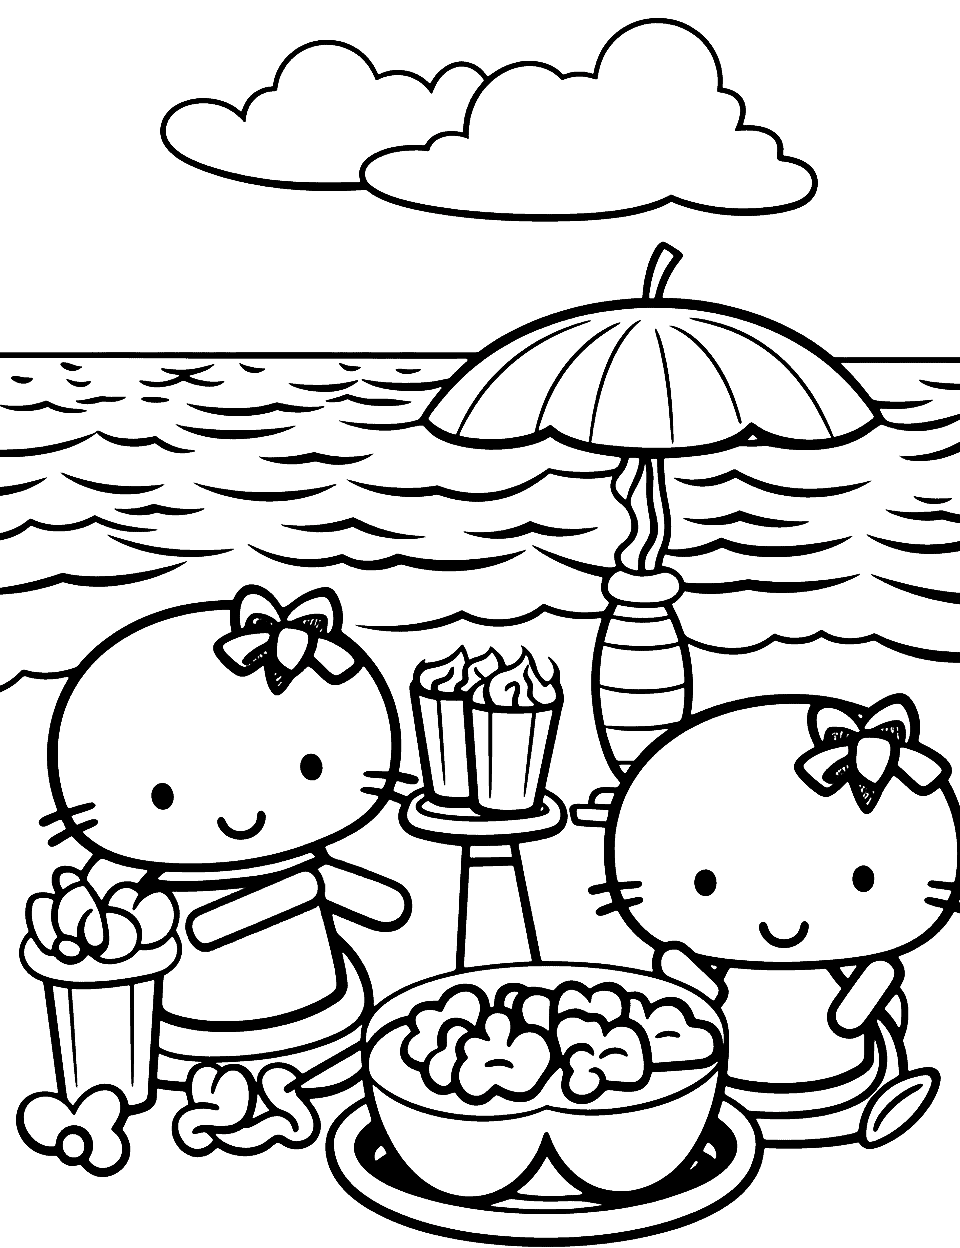 Hello Kitty's Summer Tea Party Coloring Page - Hello Kitty and friends having a tea party outdoors with cakes, biscuits, and summer drinks.